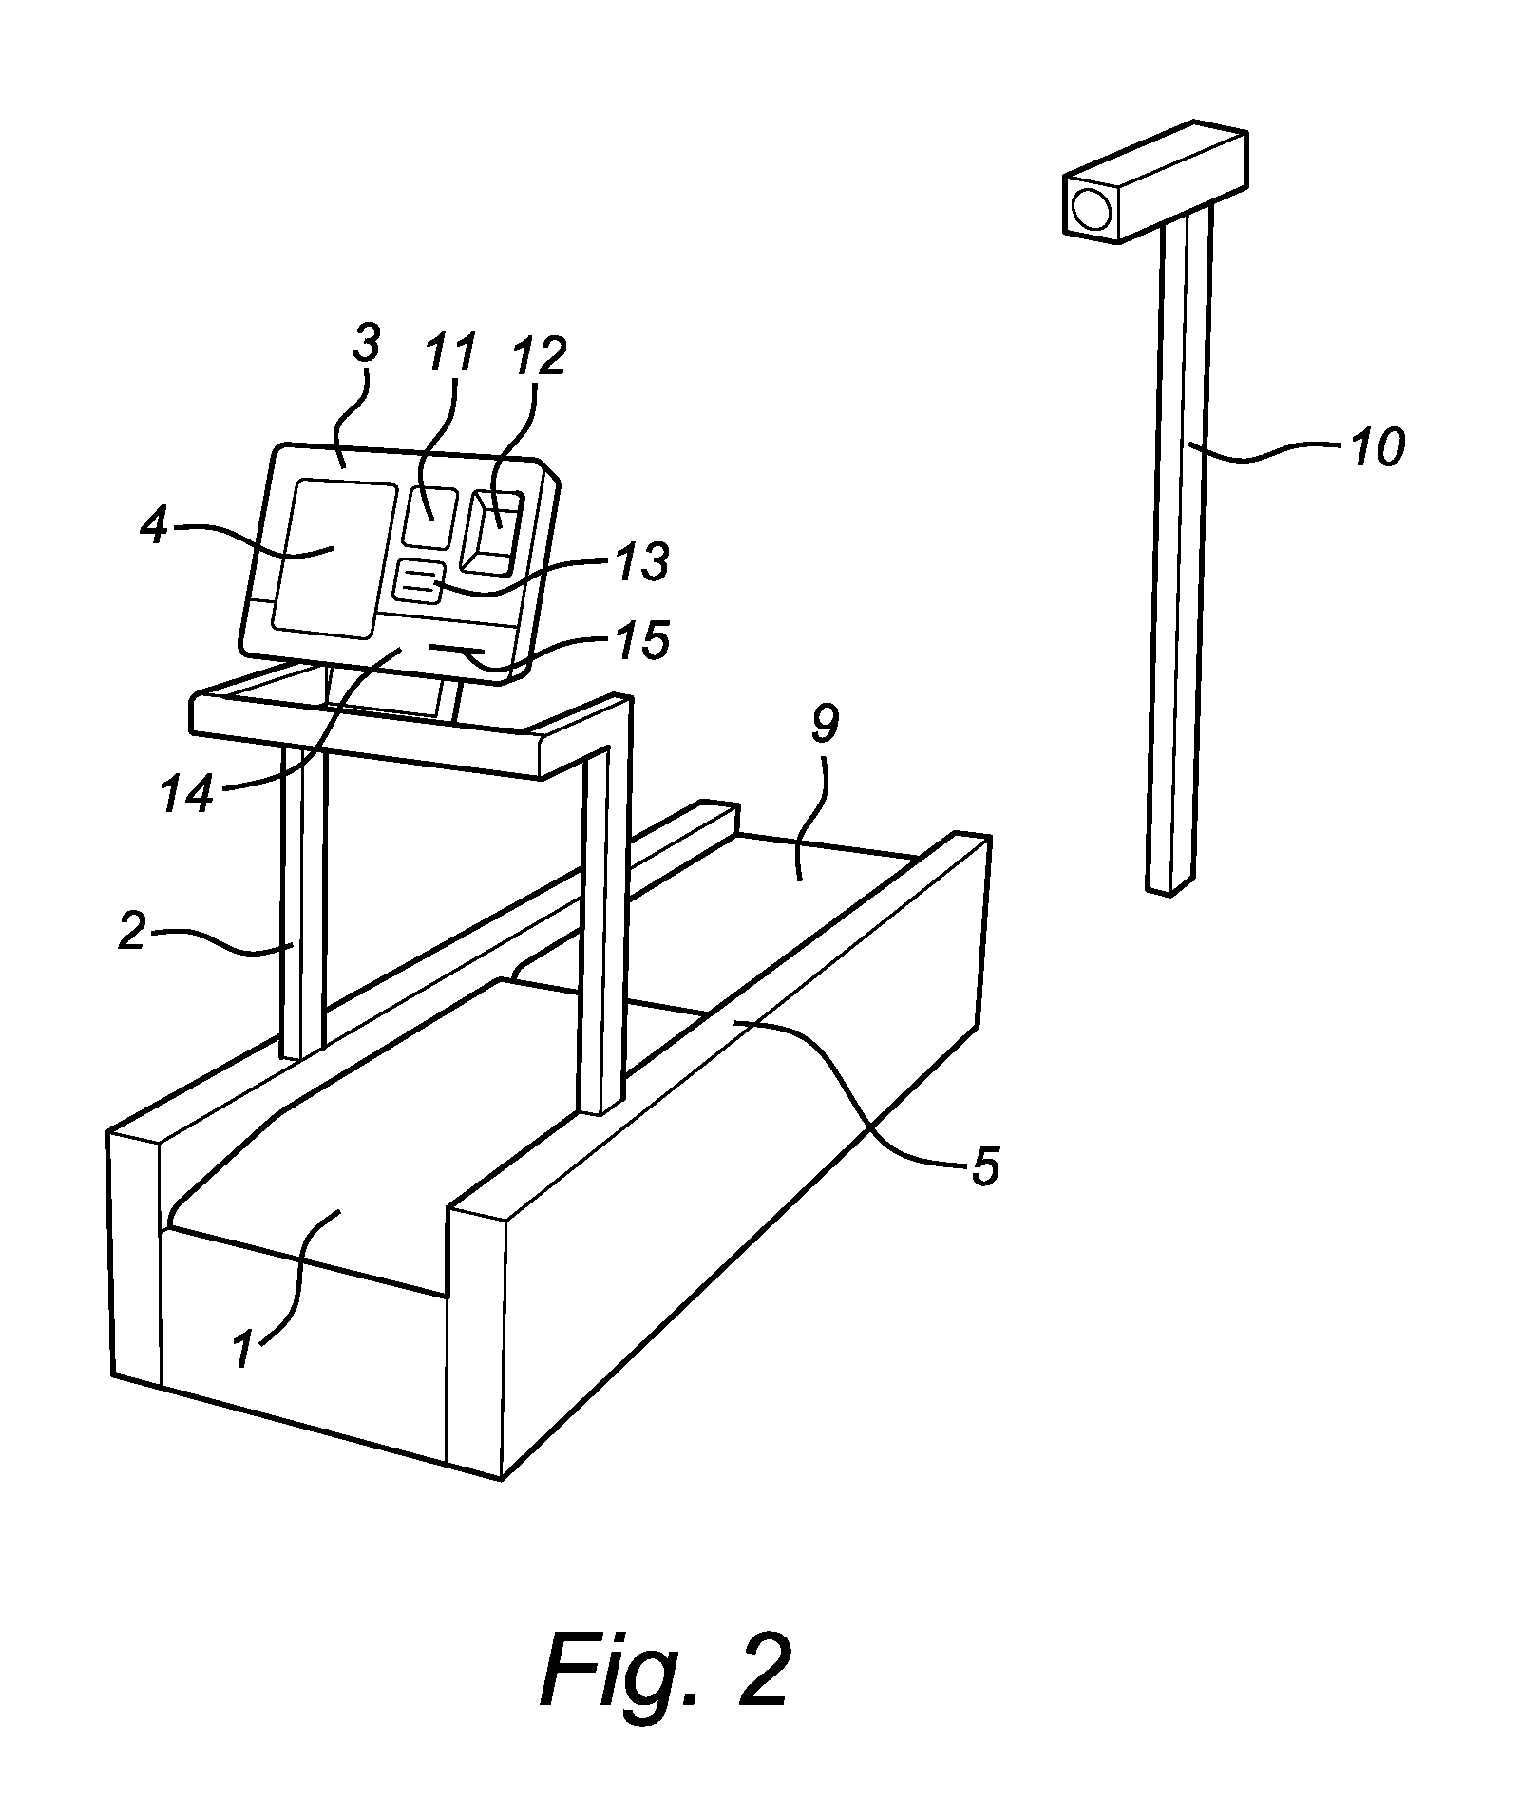 Method and system for depositing and checking of baggage into airline flights